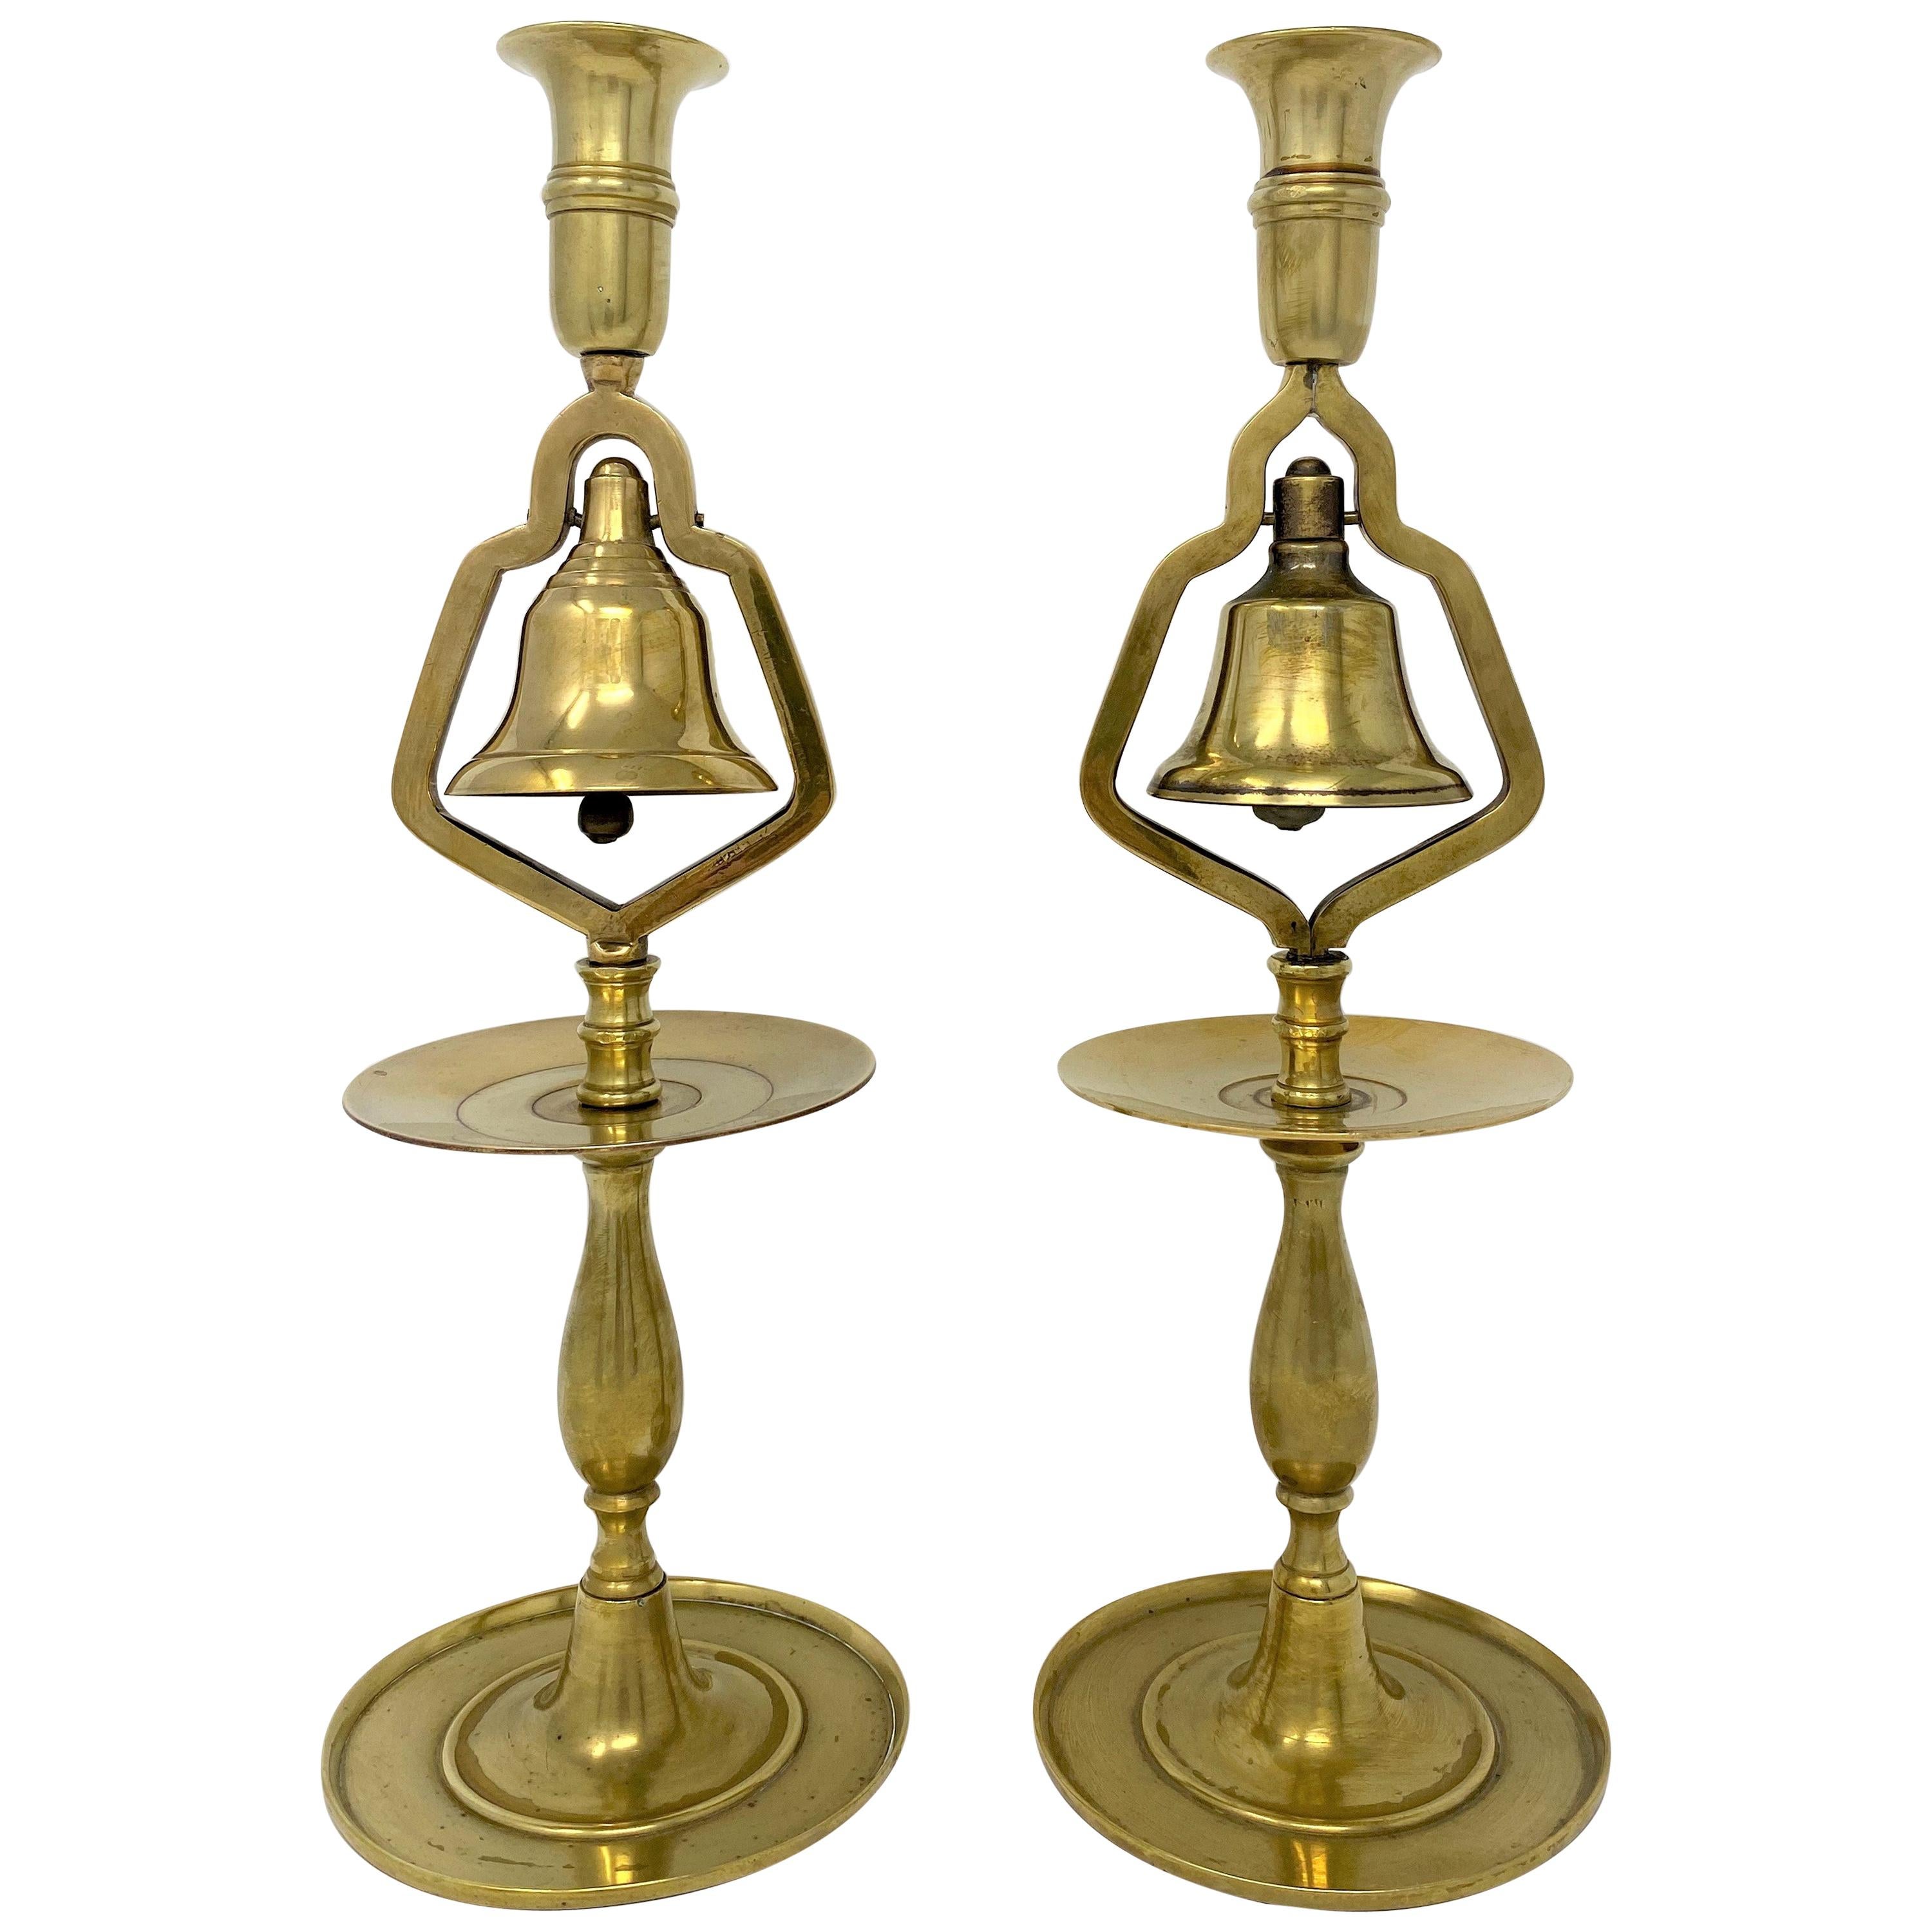 Pair of English Victorian Brass Tavern Candlesticks with Service Bells, 1890